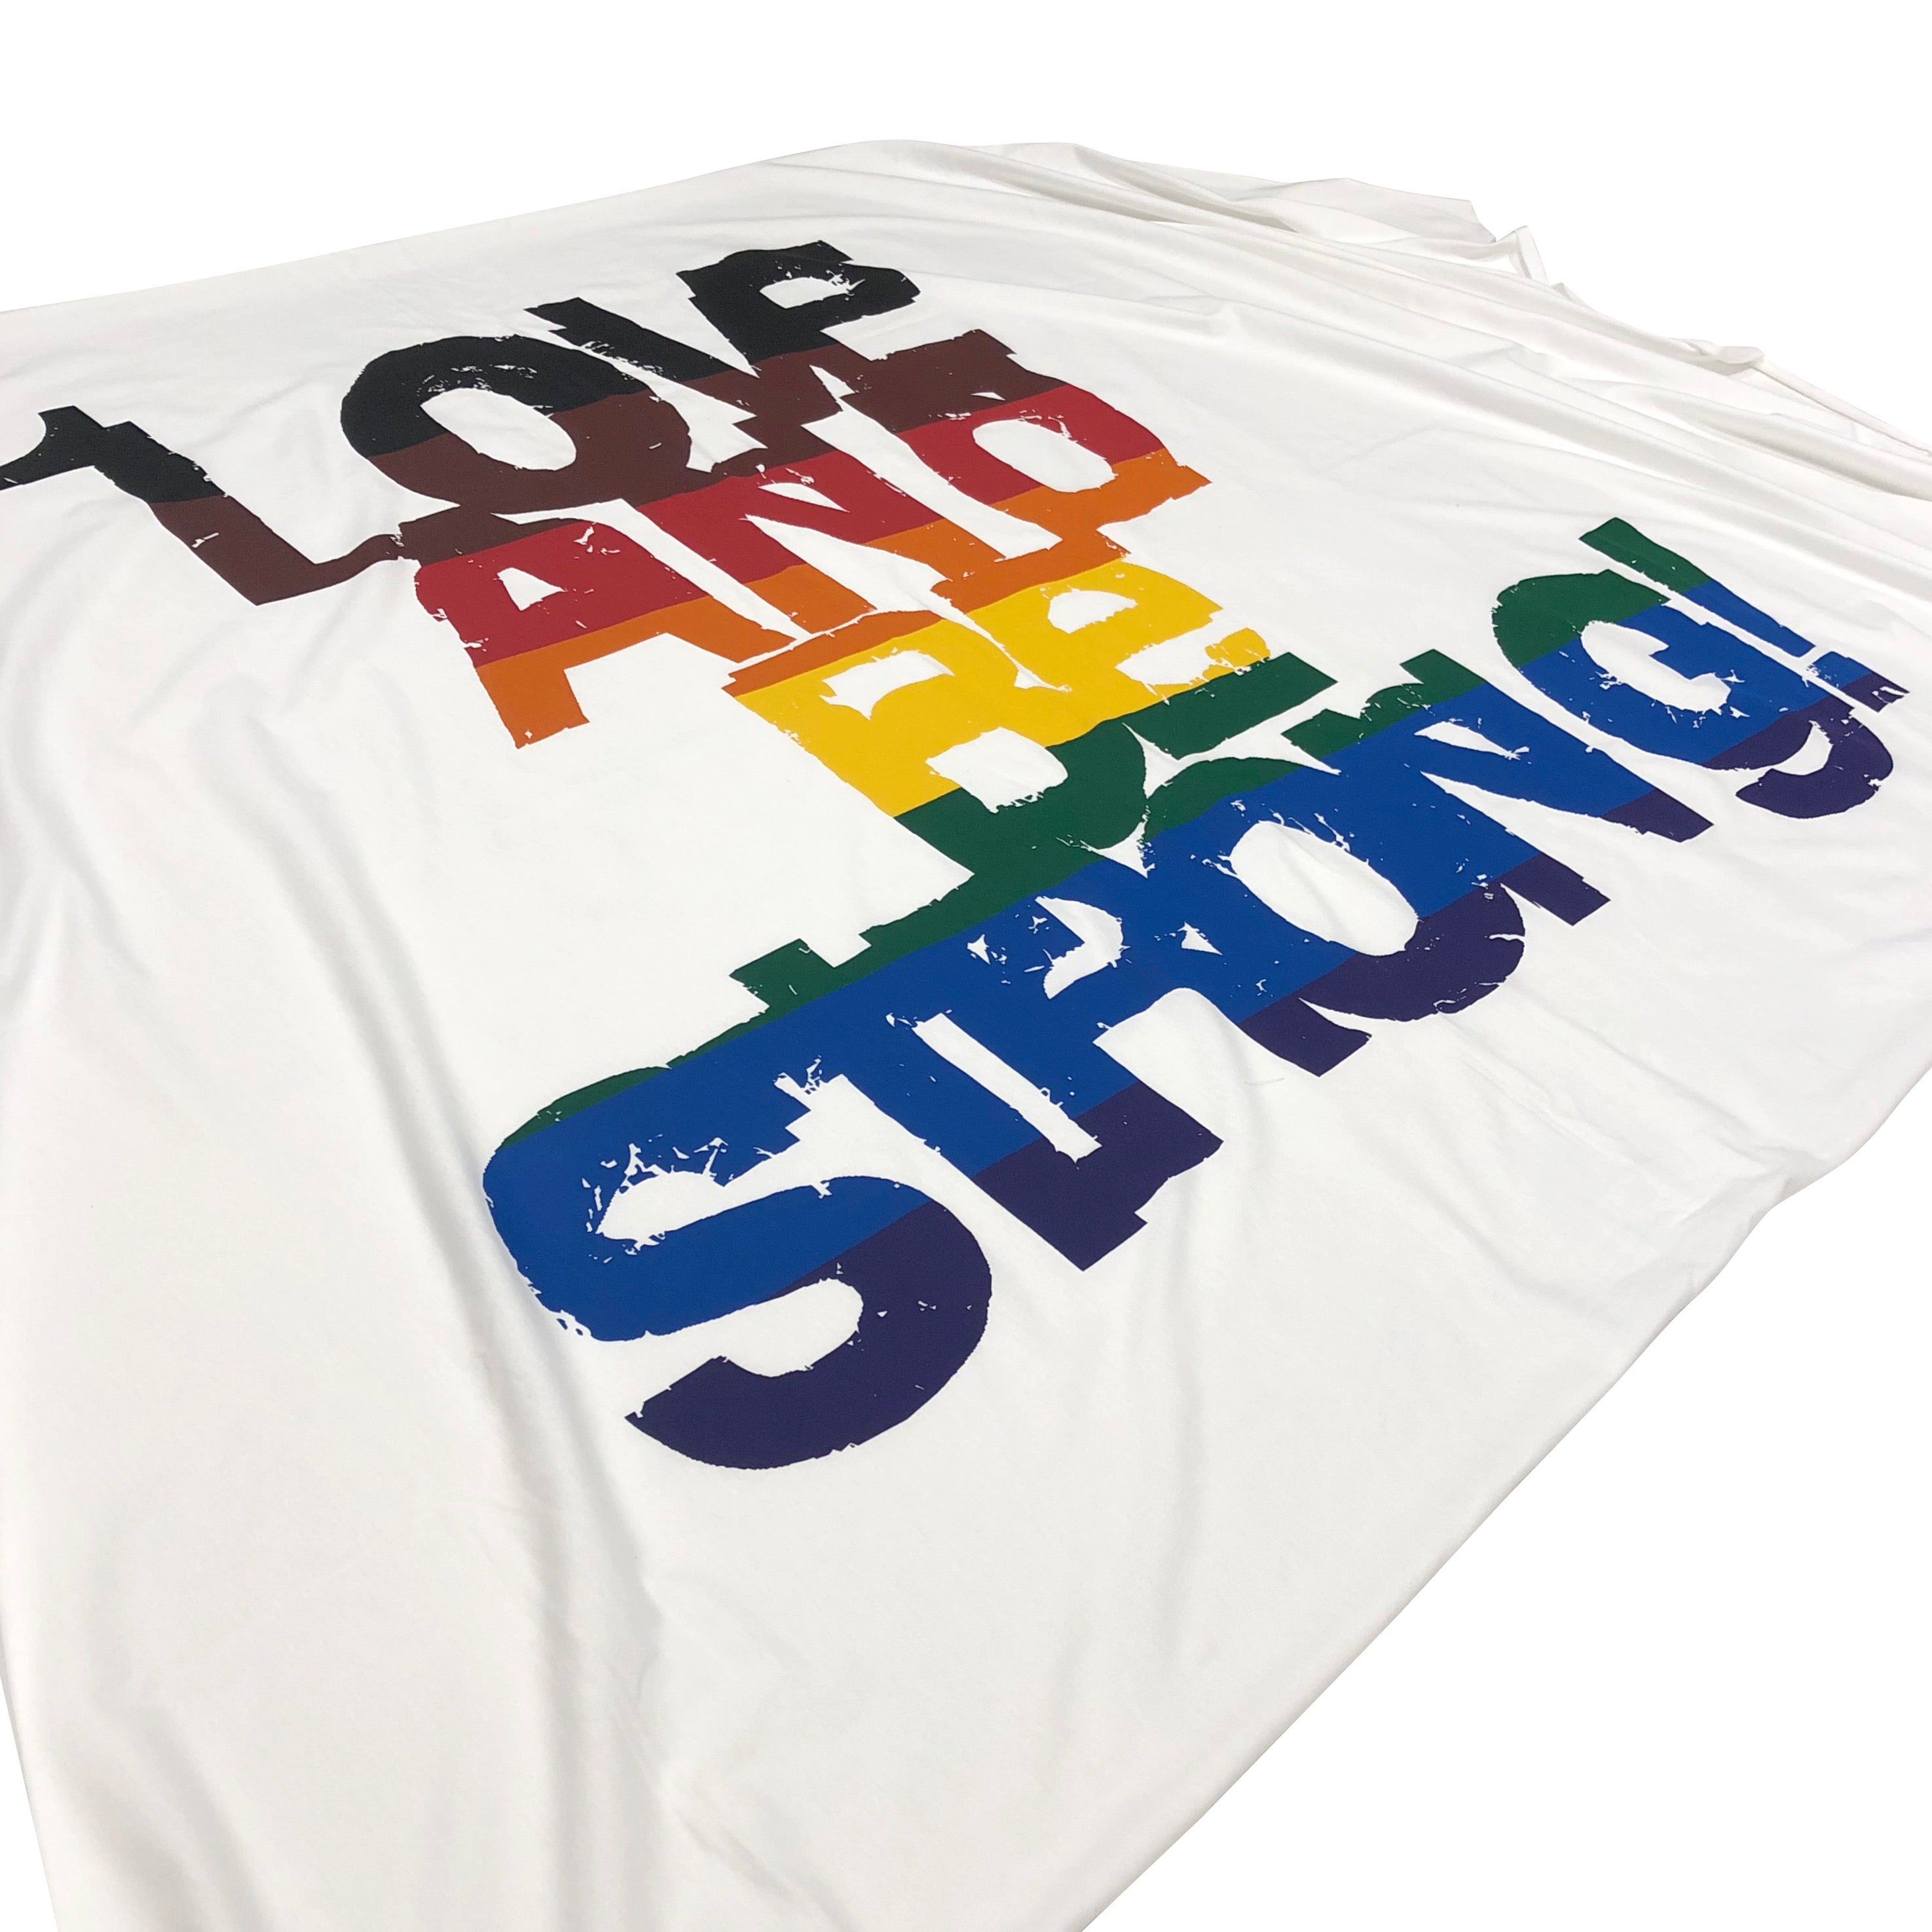 50% OFF THE SOLOIST. LOVE AND BE STRONG STOLE